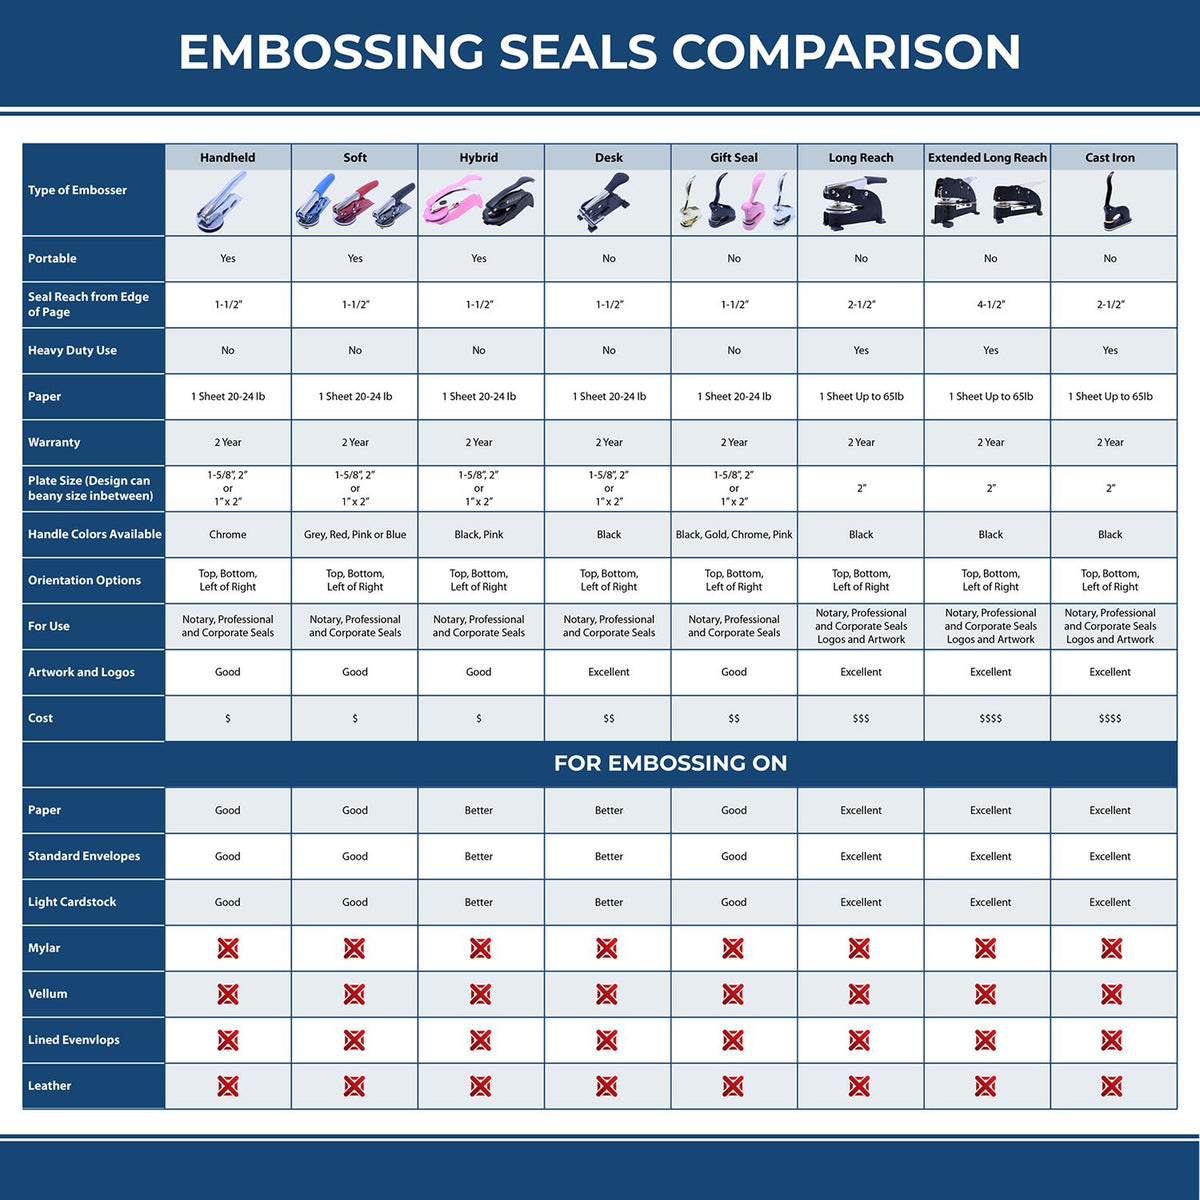 A comparison chart for the different types of mount models available for the Hybrid Pennsylvania Land Surveyor Seal